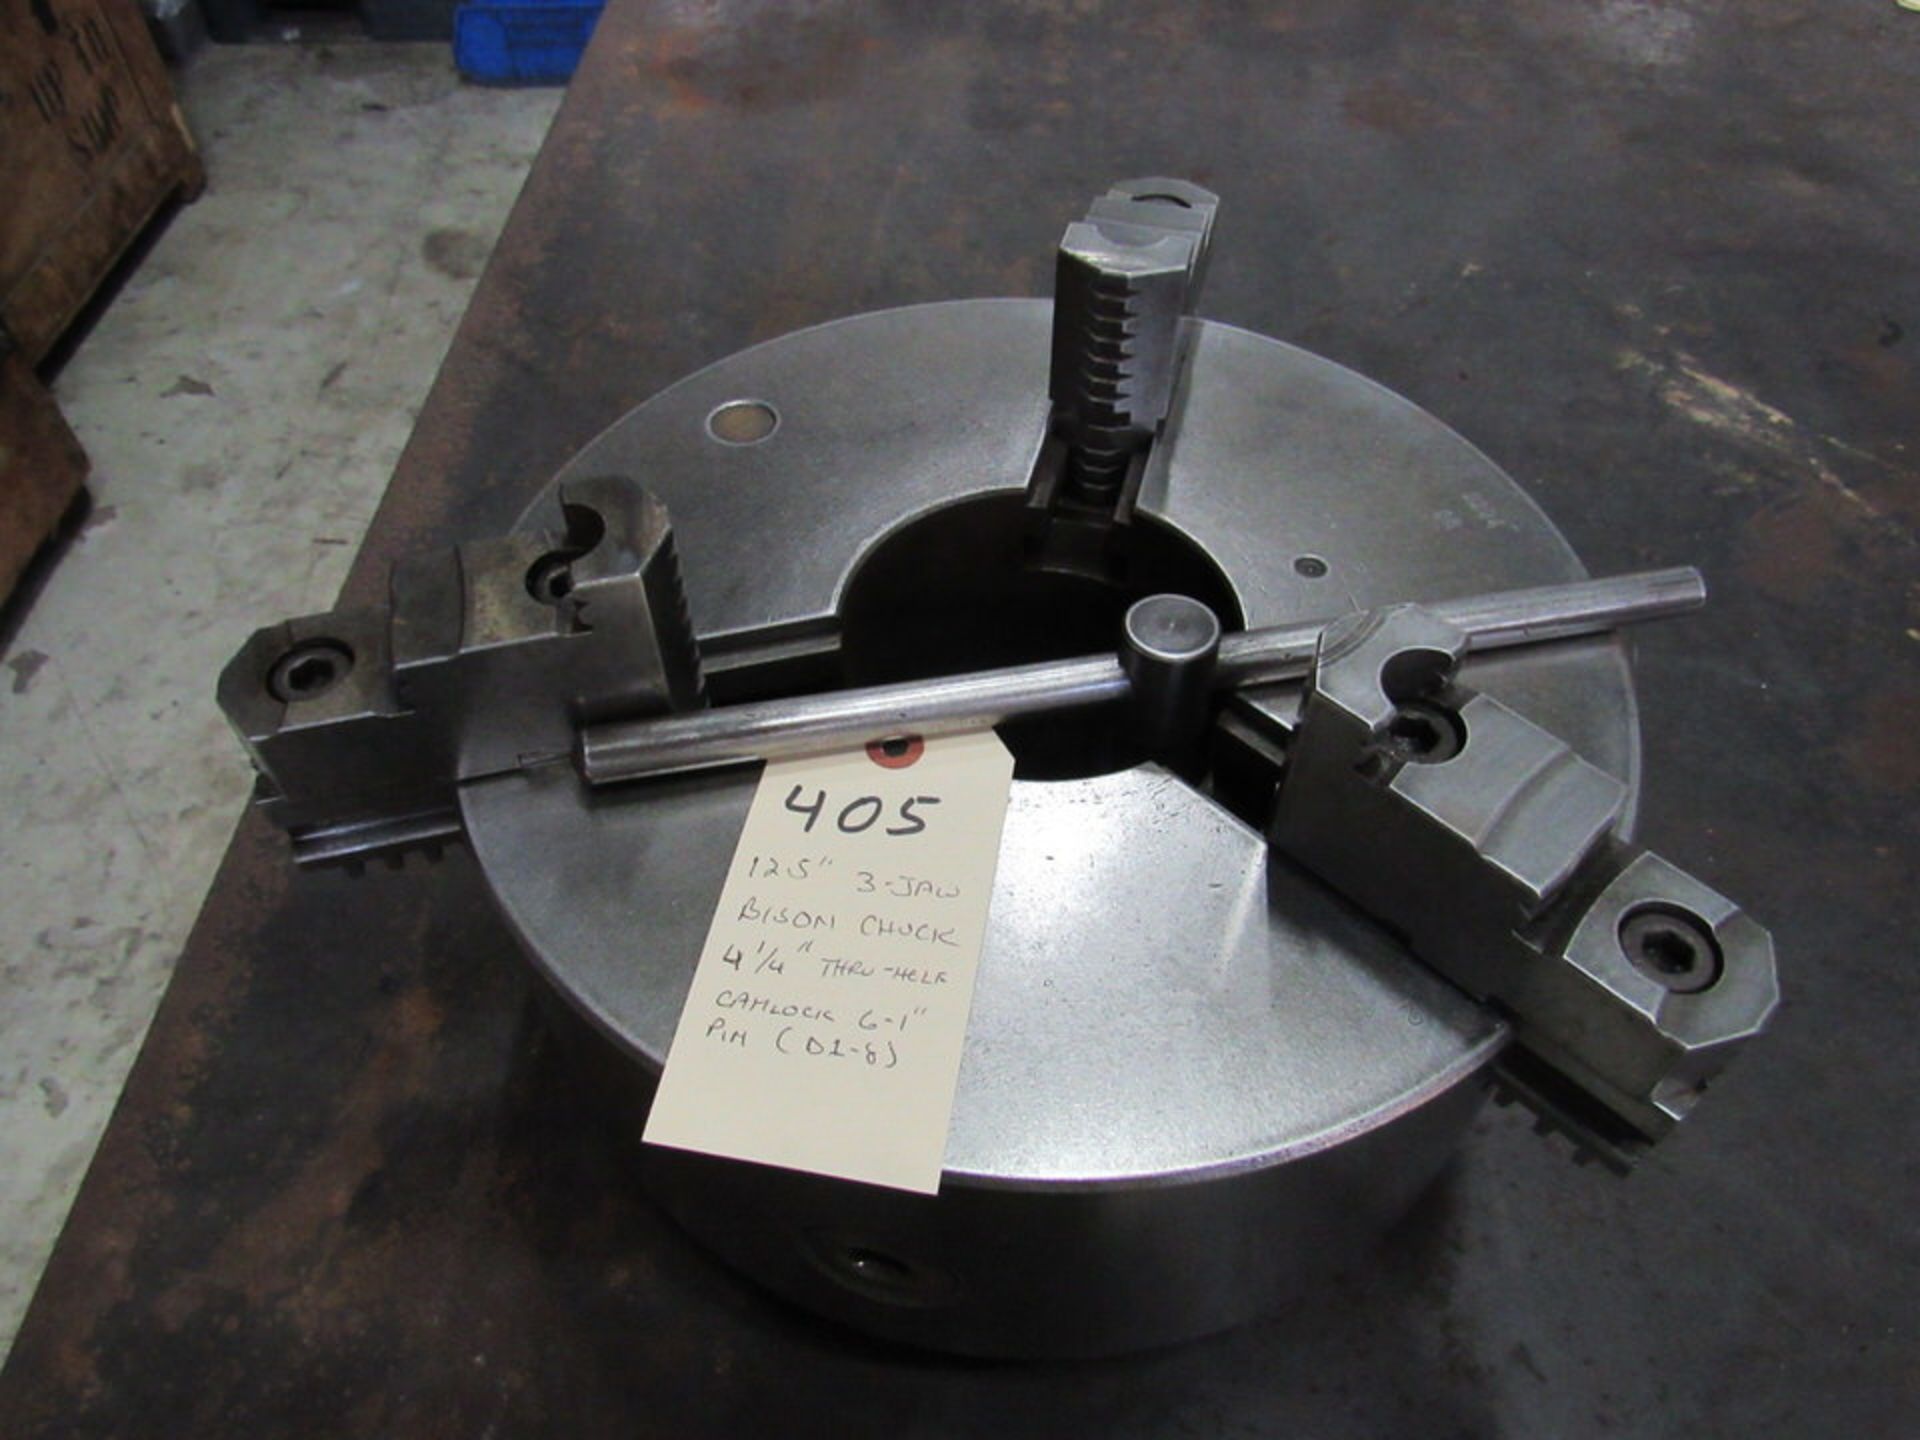 12.5" 3-Jaw Bison Chuck, 4.25" through hole, camlock 6 - 1" pin (D1-8), S/N NA (LOCATION: 3603 Melva